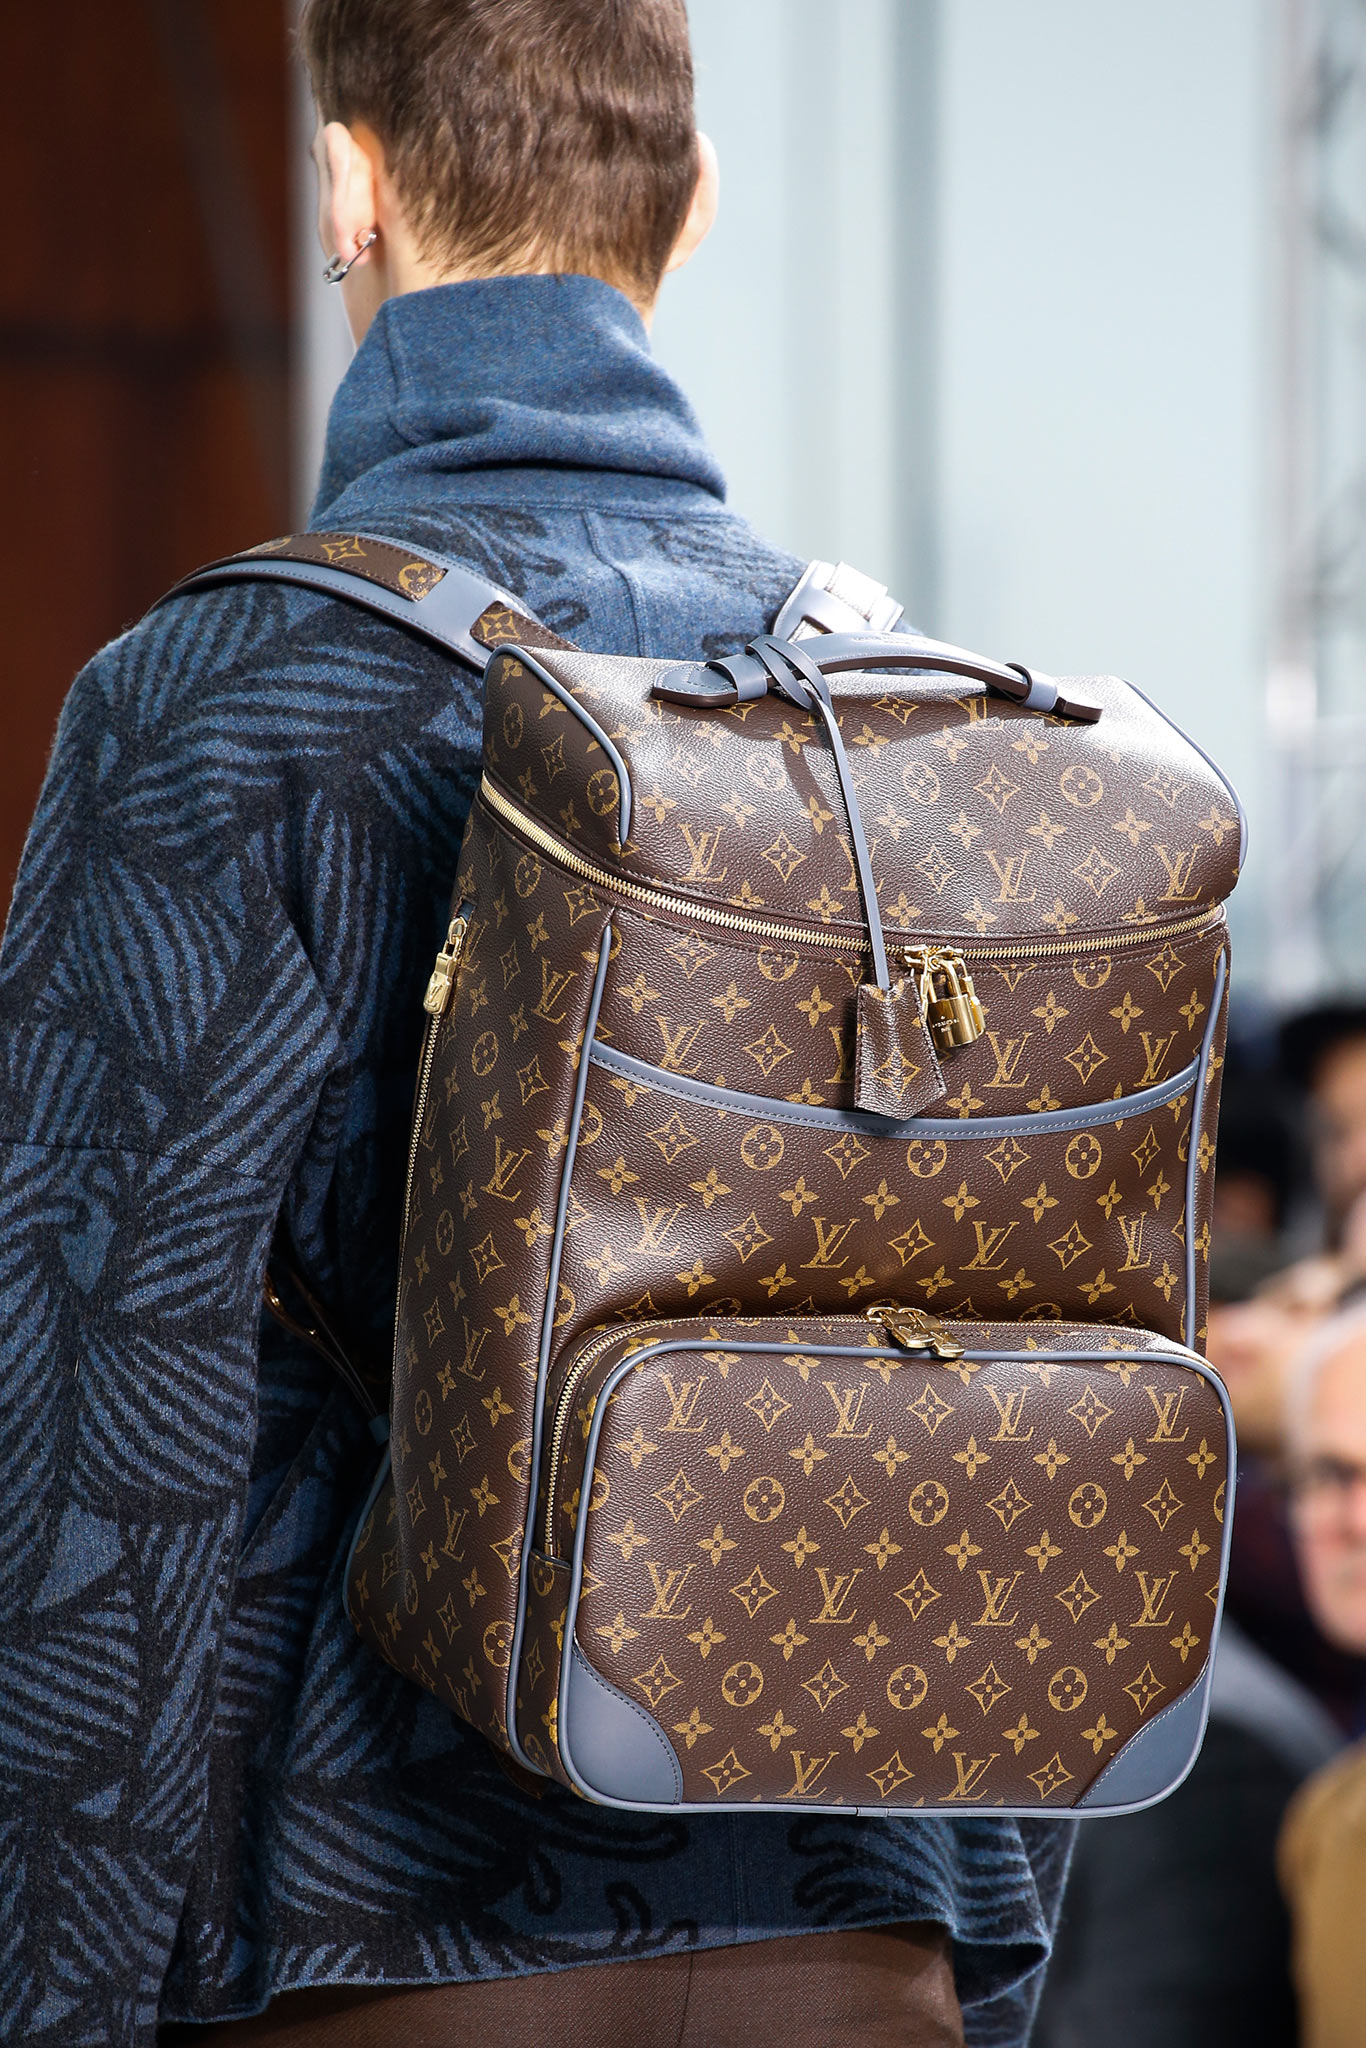 Louis Vuitton New Collection For Men | NAR Media Kit